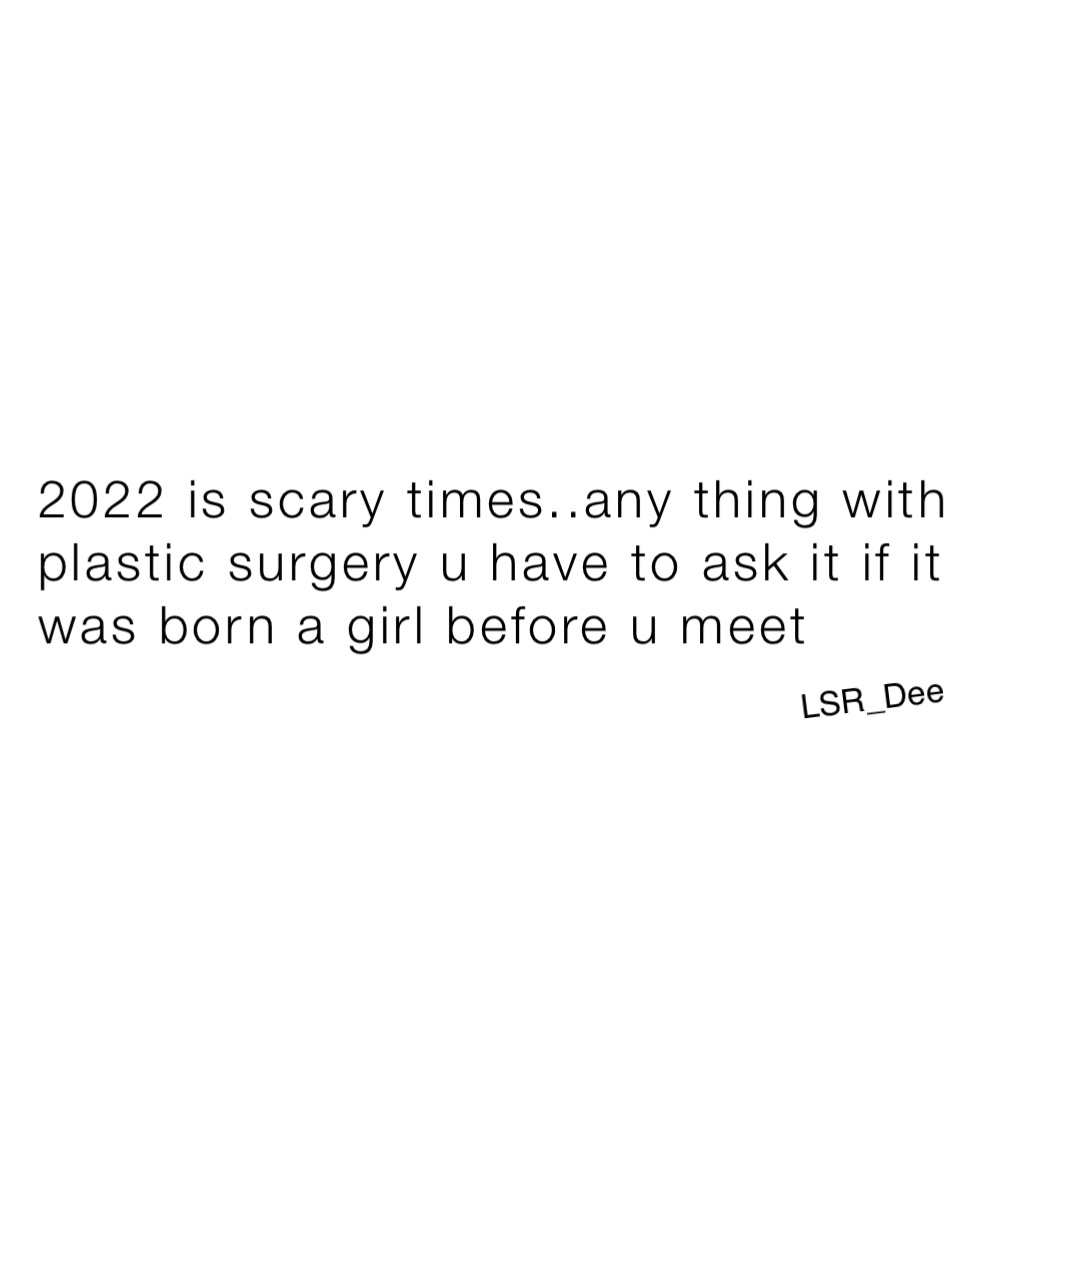 2022 is scary times..any thing with plastic surgery u have to ask it if it was born a girl before u meet